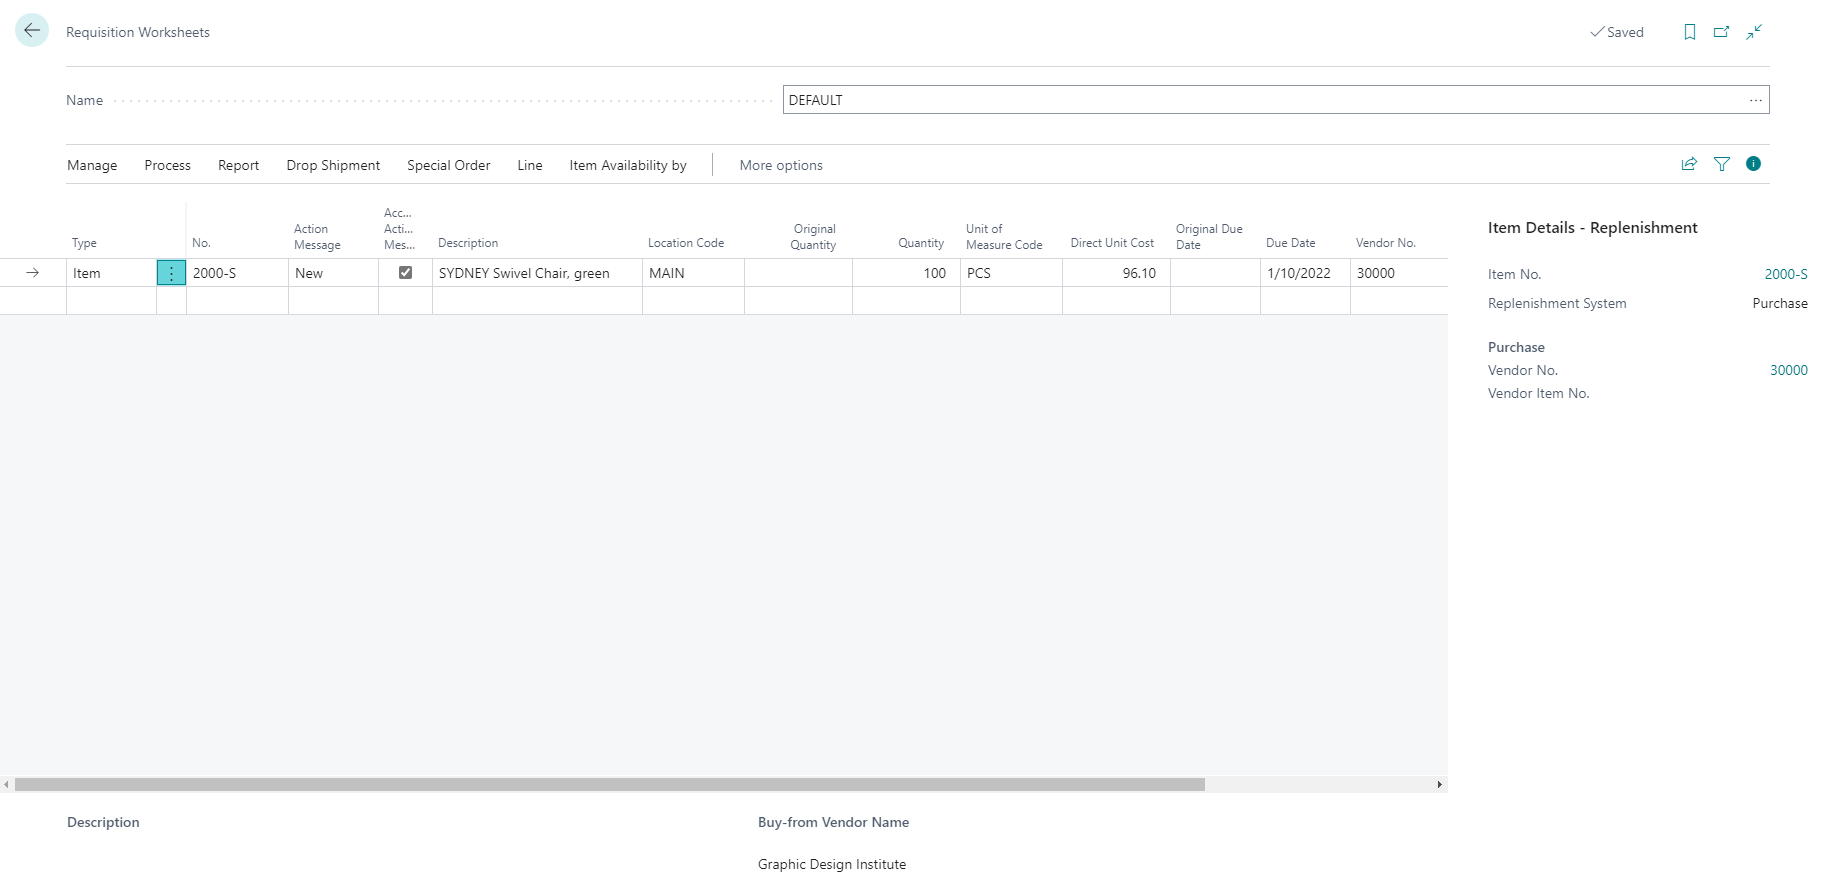 Screenshot of the Requisition Worksheet for Fixed Reorder Quantity.